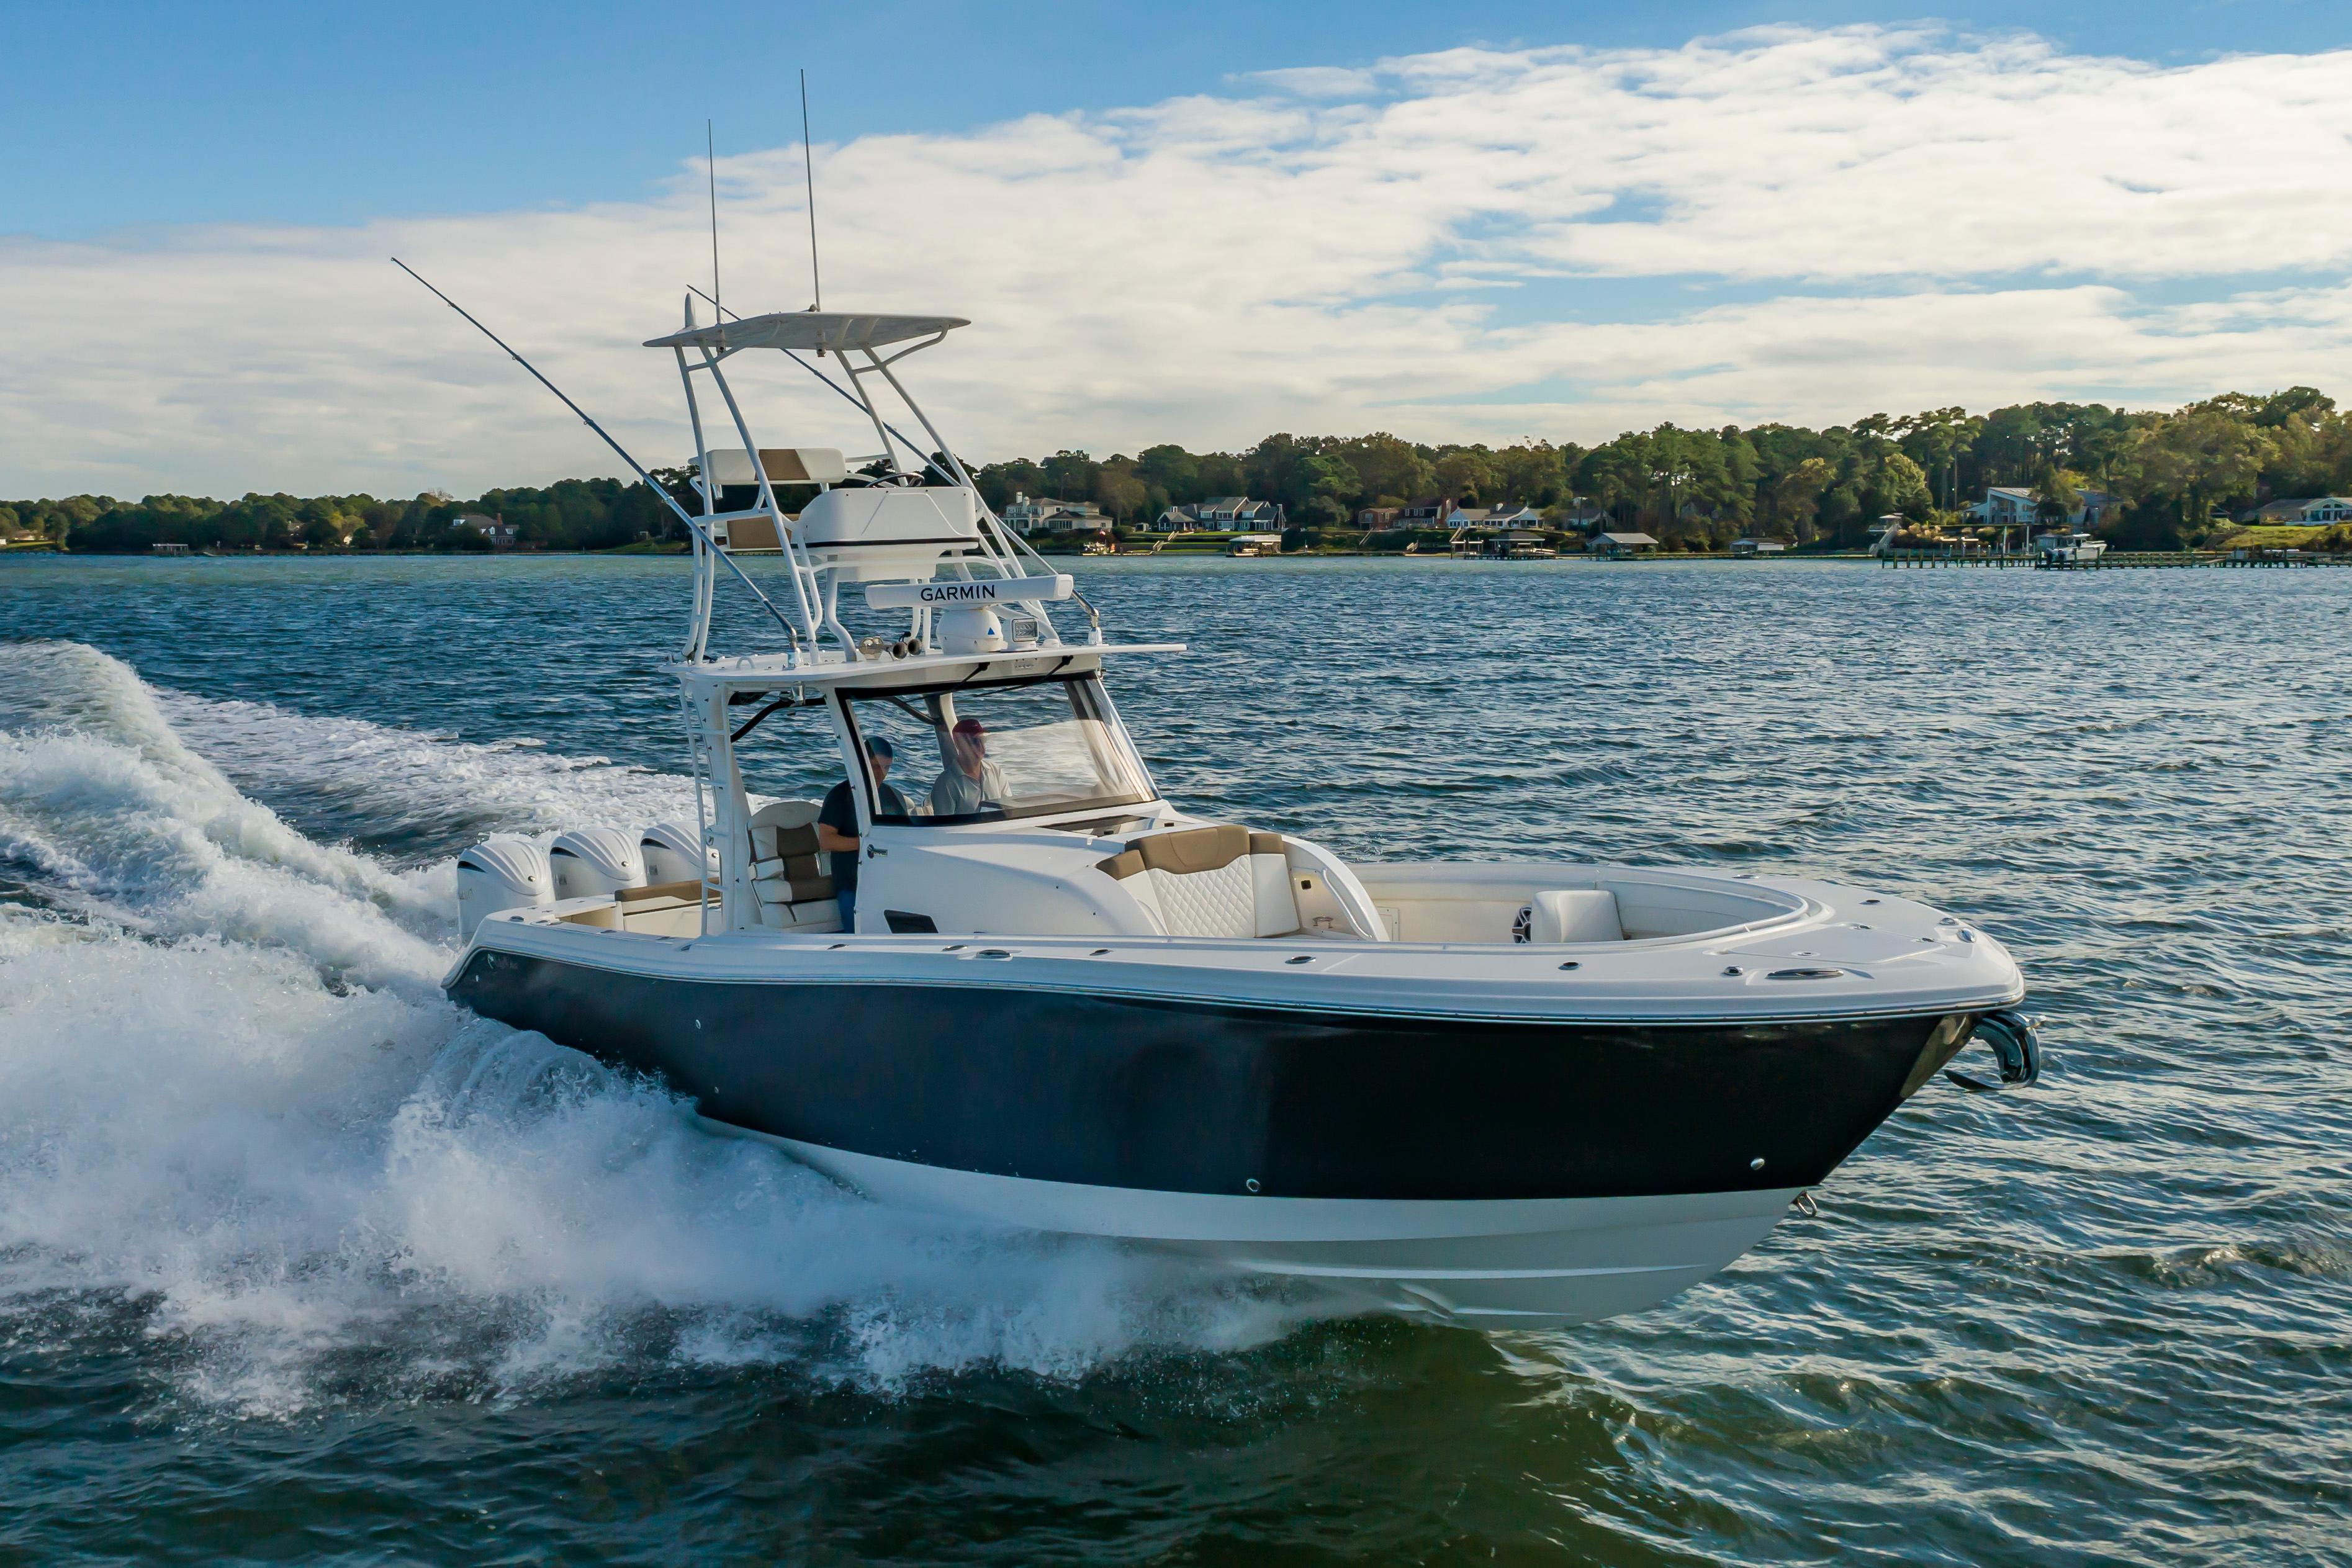 Sport Fishing boats for sale in Virginia Beach - Boat Trader